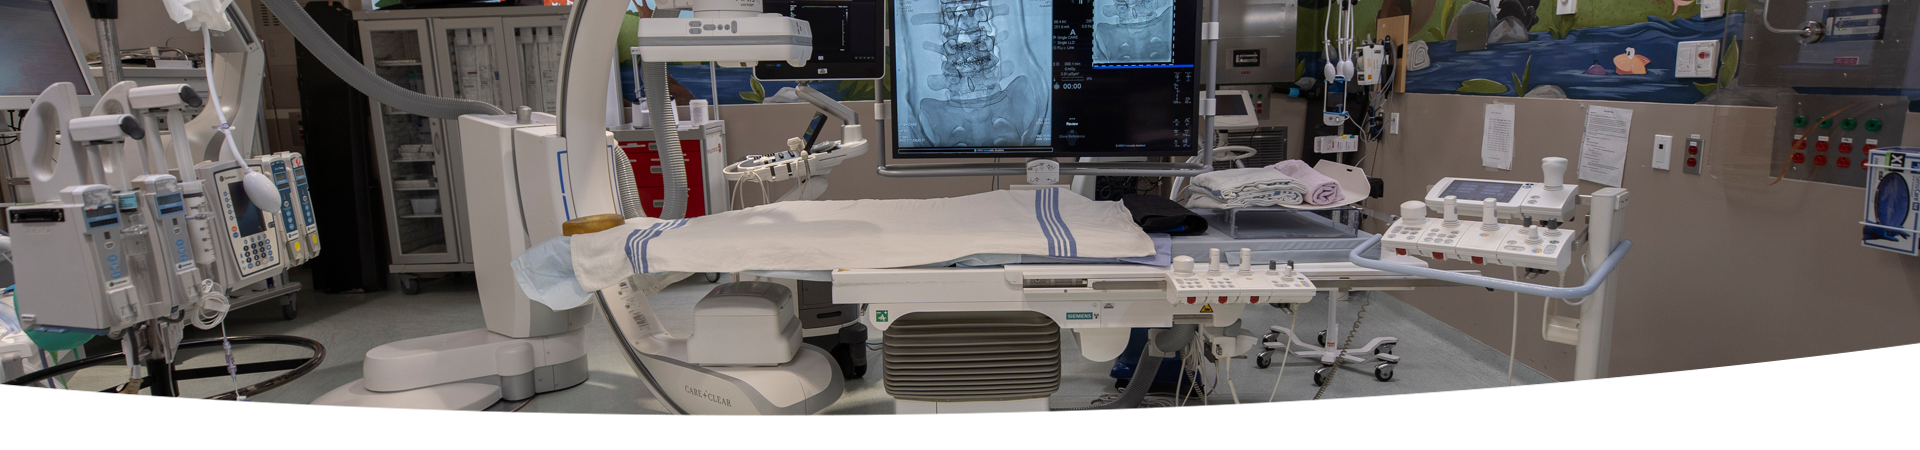 A room with a Single Plane Digital Angiography unit. There is a  variety of hospital equipment in the background.